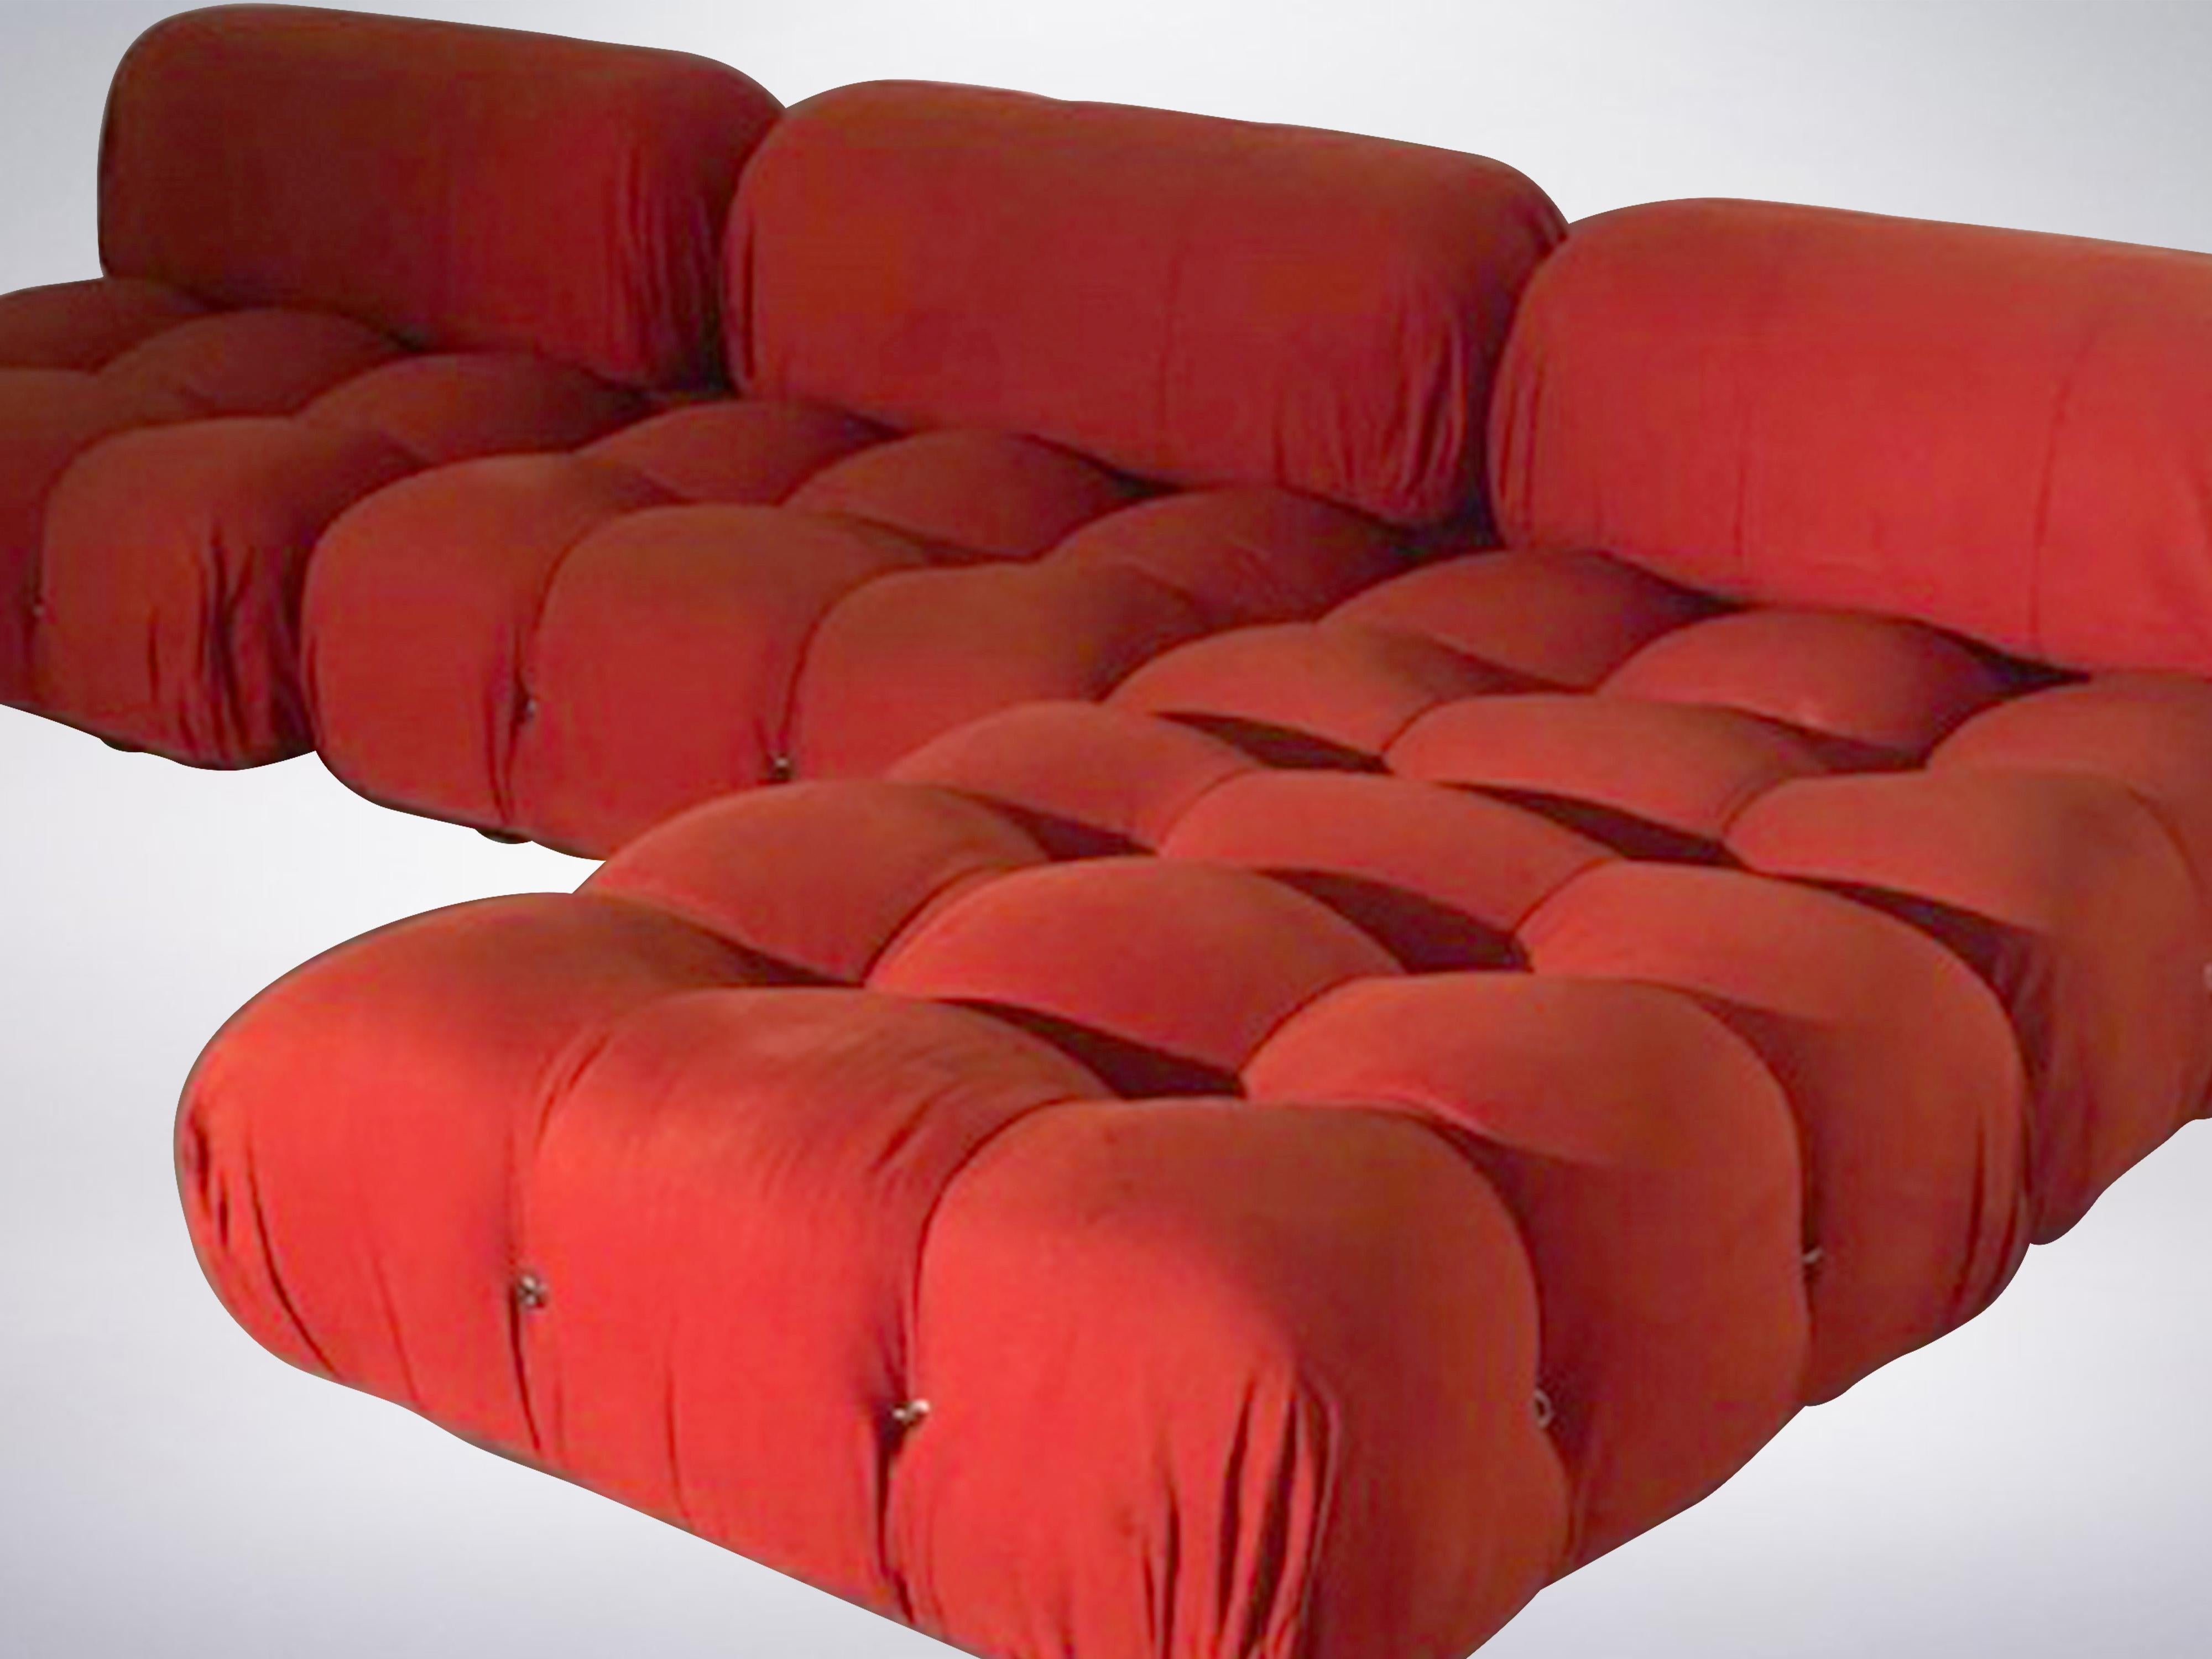 Mario Bellini Camaleonda sofa set of 4 elements in orange upholstery, made for B&B Italia in 1970. The seats are currently clad in their original upholstery. 

 